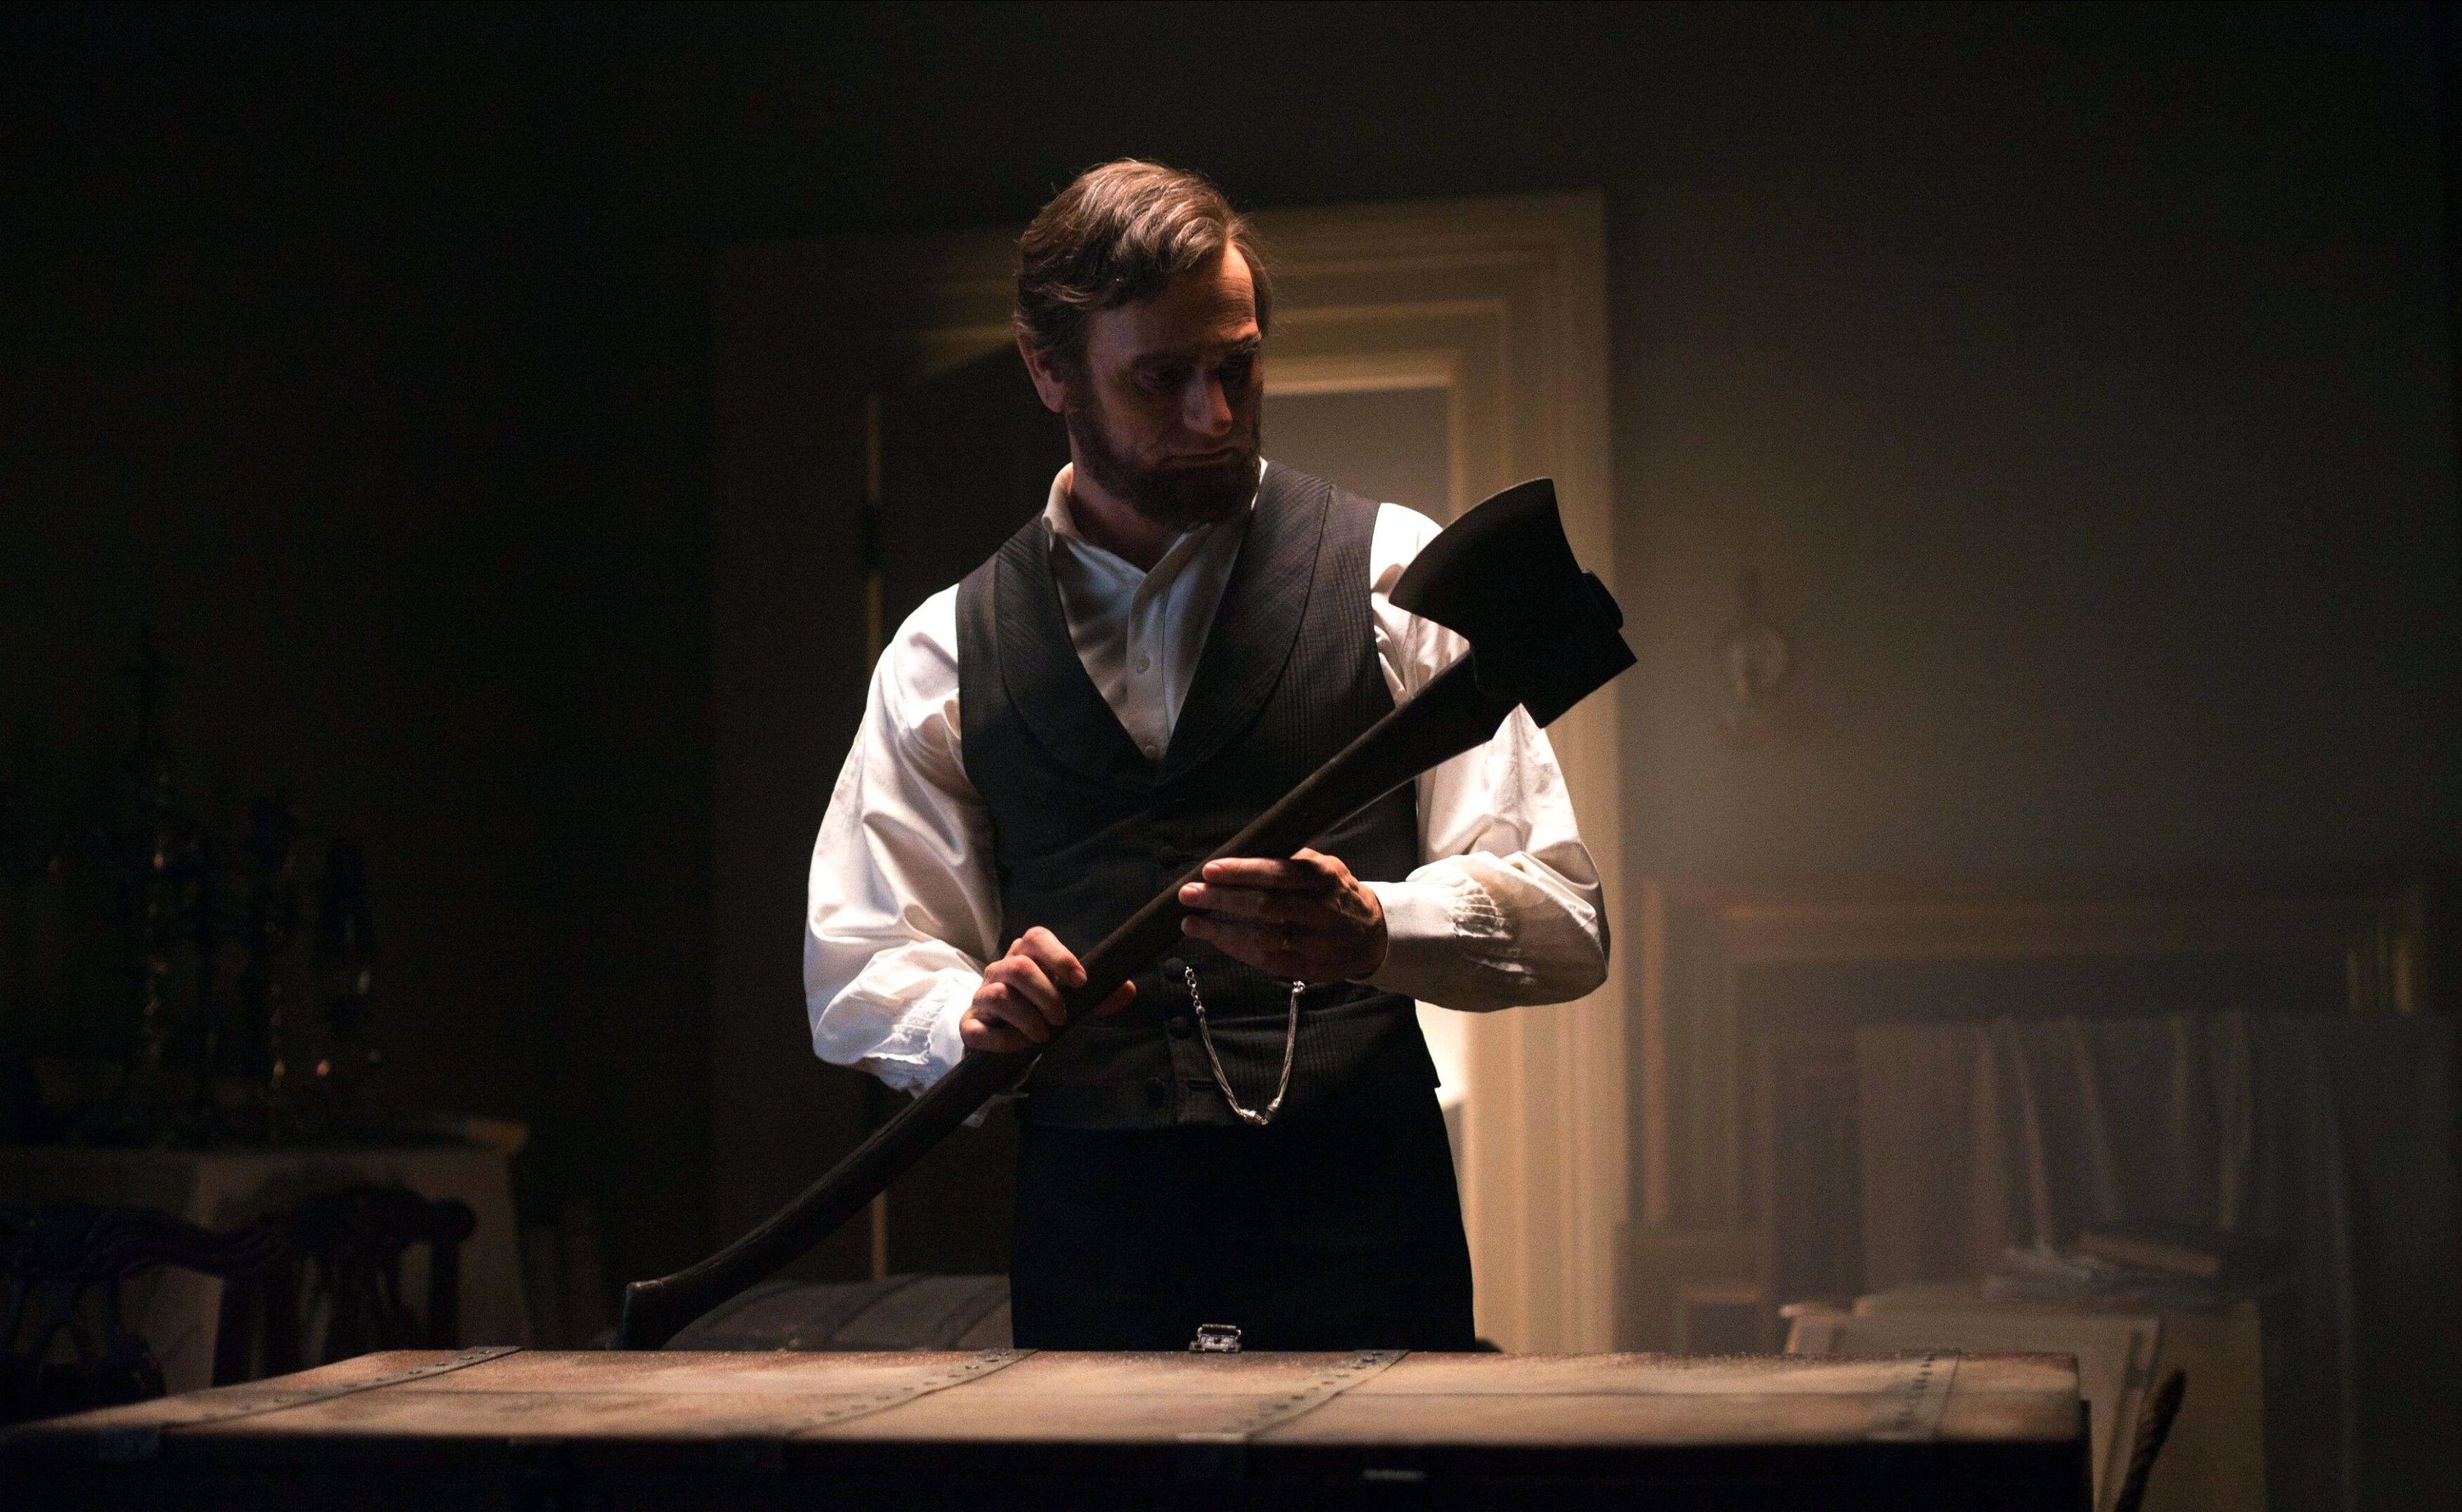 Abraham Lincoln examines an ax in a dark room